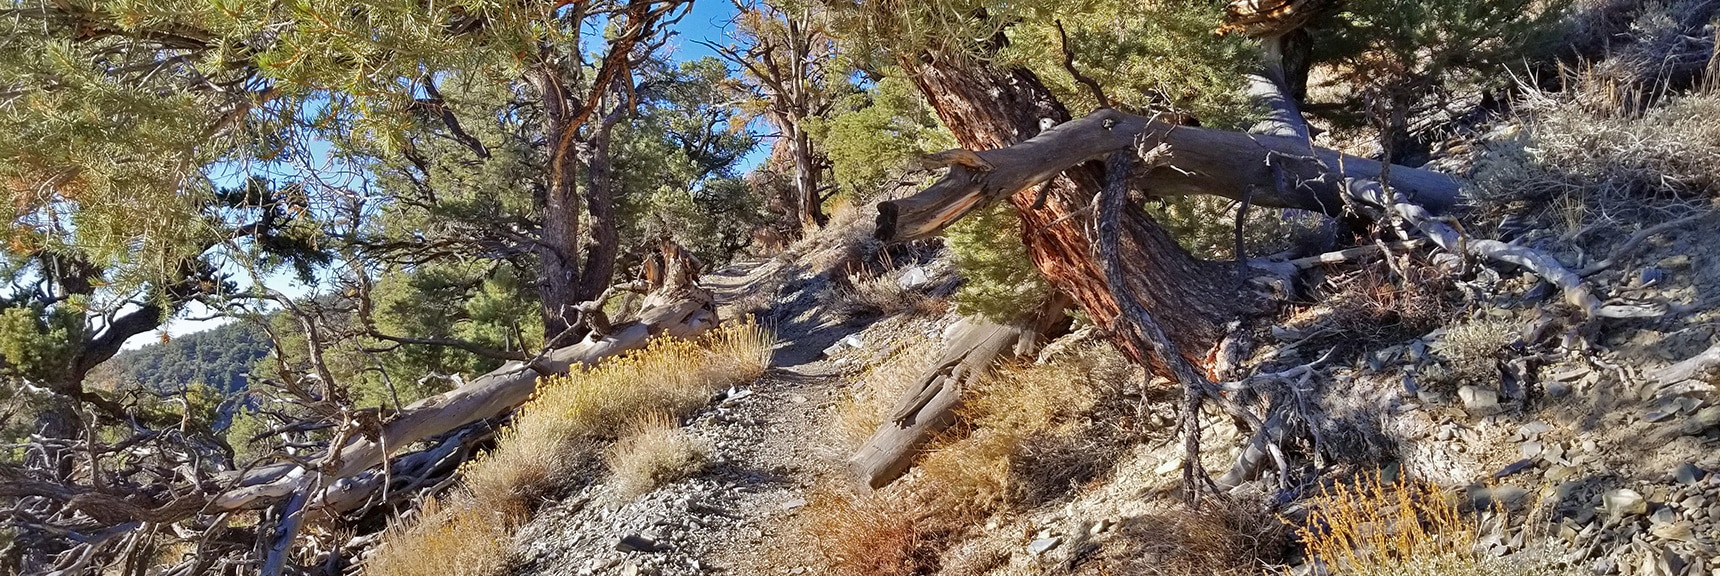 Ascending First Stretch of Trail Through Pinion Pine and Mahogany Along East Side of Rogers Peak | Telescope Peak Summit from Wildrose Charcoal Kilns Parking Area, Panamint Mountains, Death Valley National Park, California